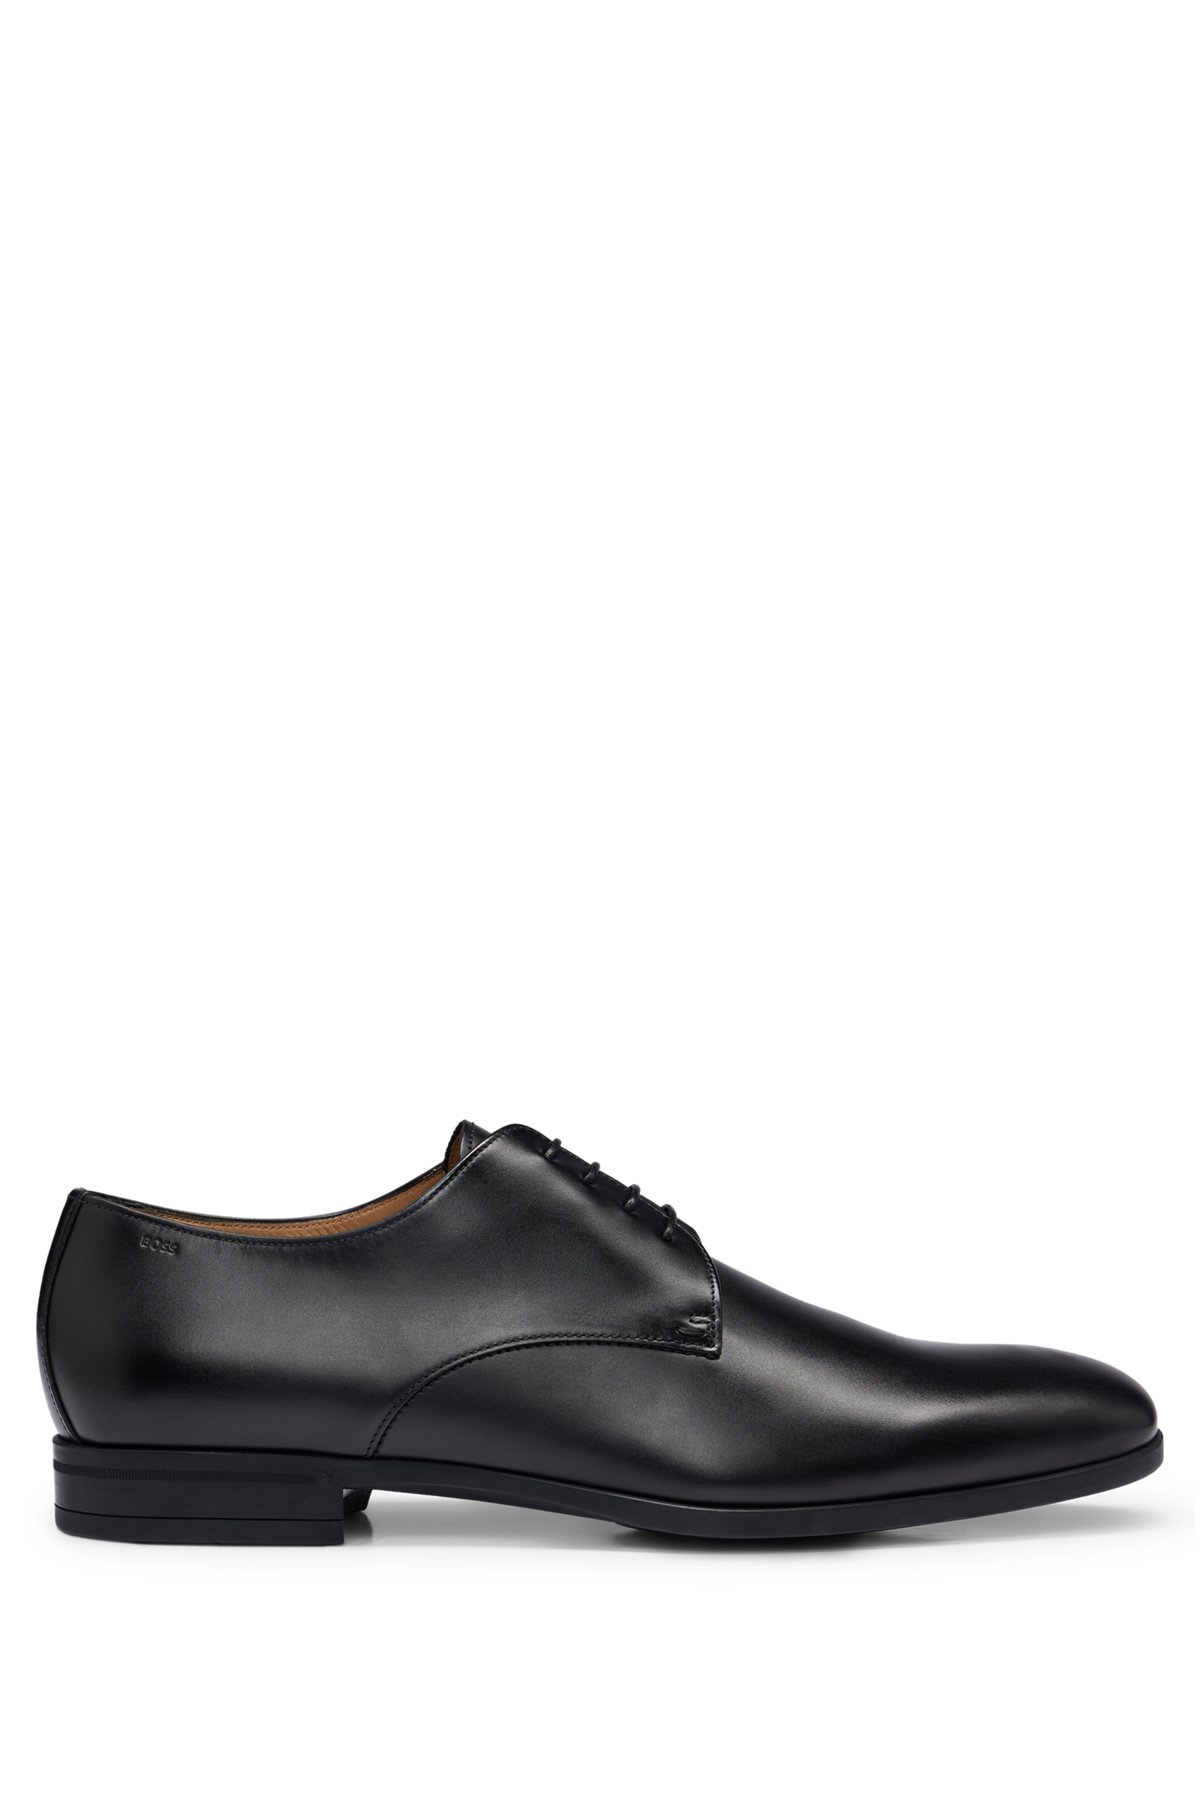 Leather Derby shoes with rubber sole, Black